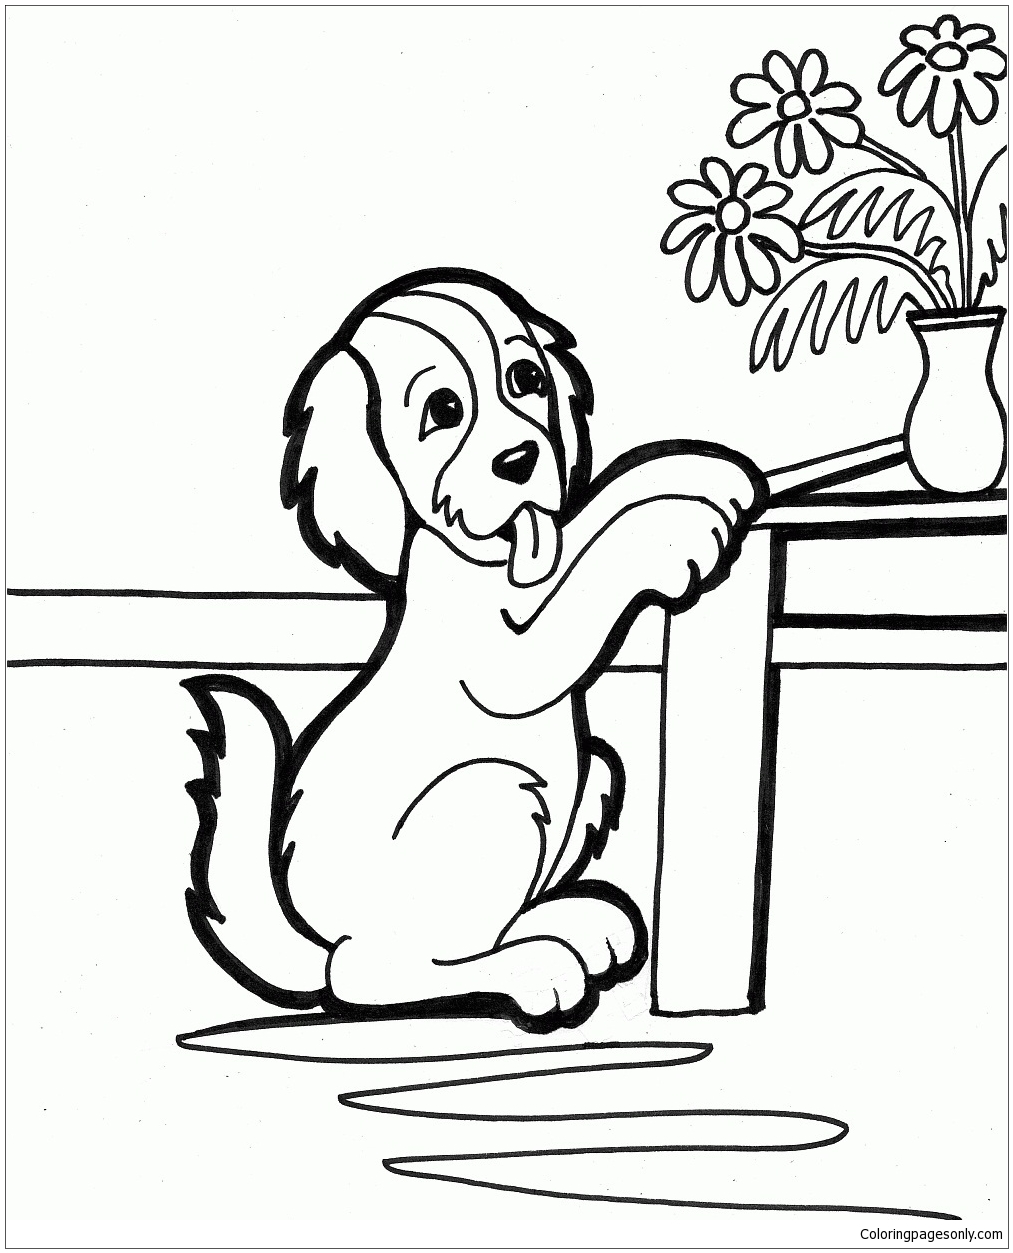 Naughty Puppies Coloring Pages - Puppy Coloring Pages - Coloring Pages